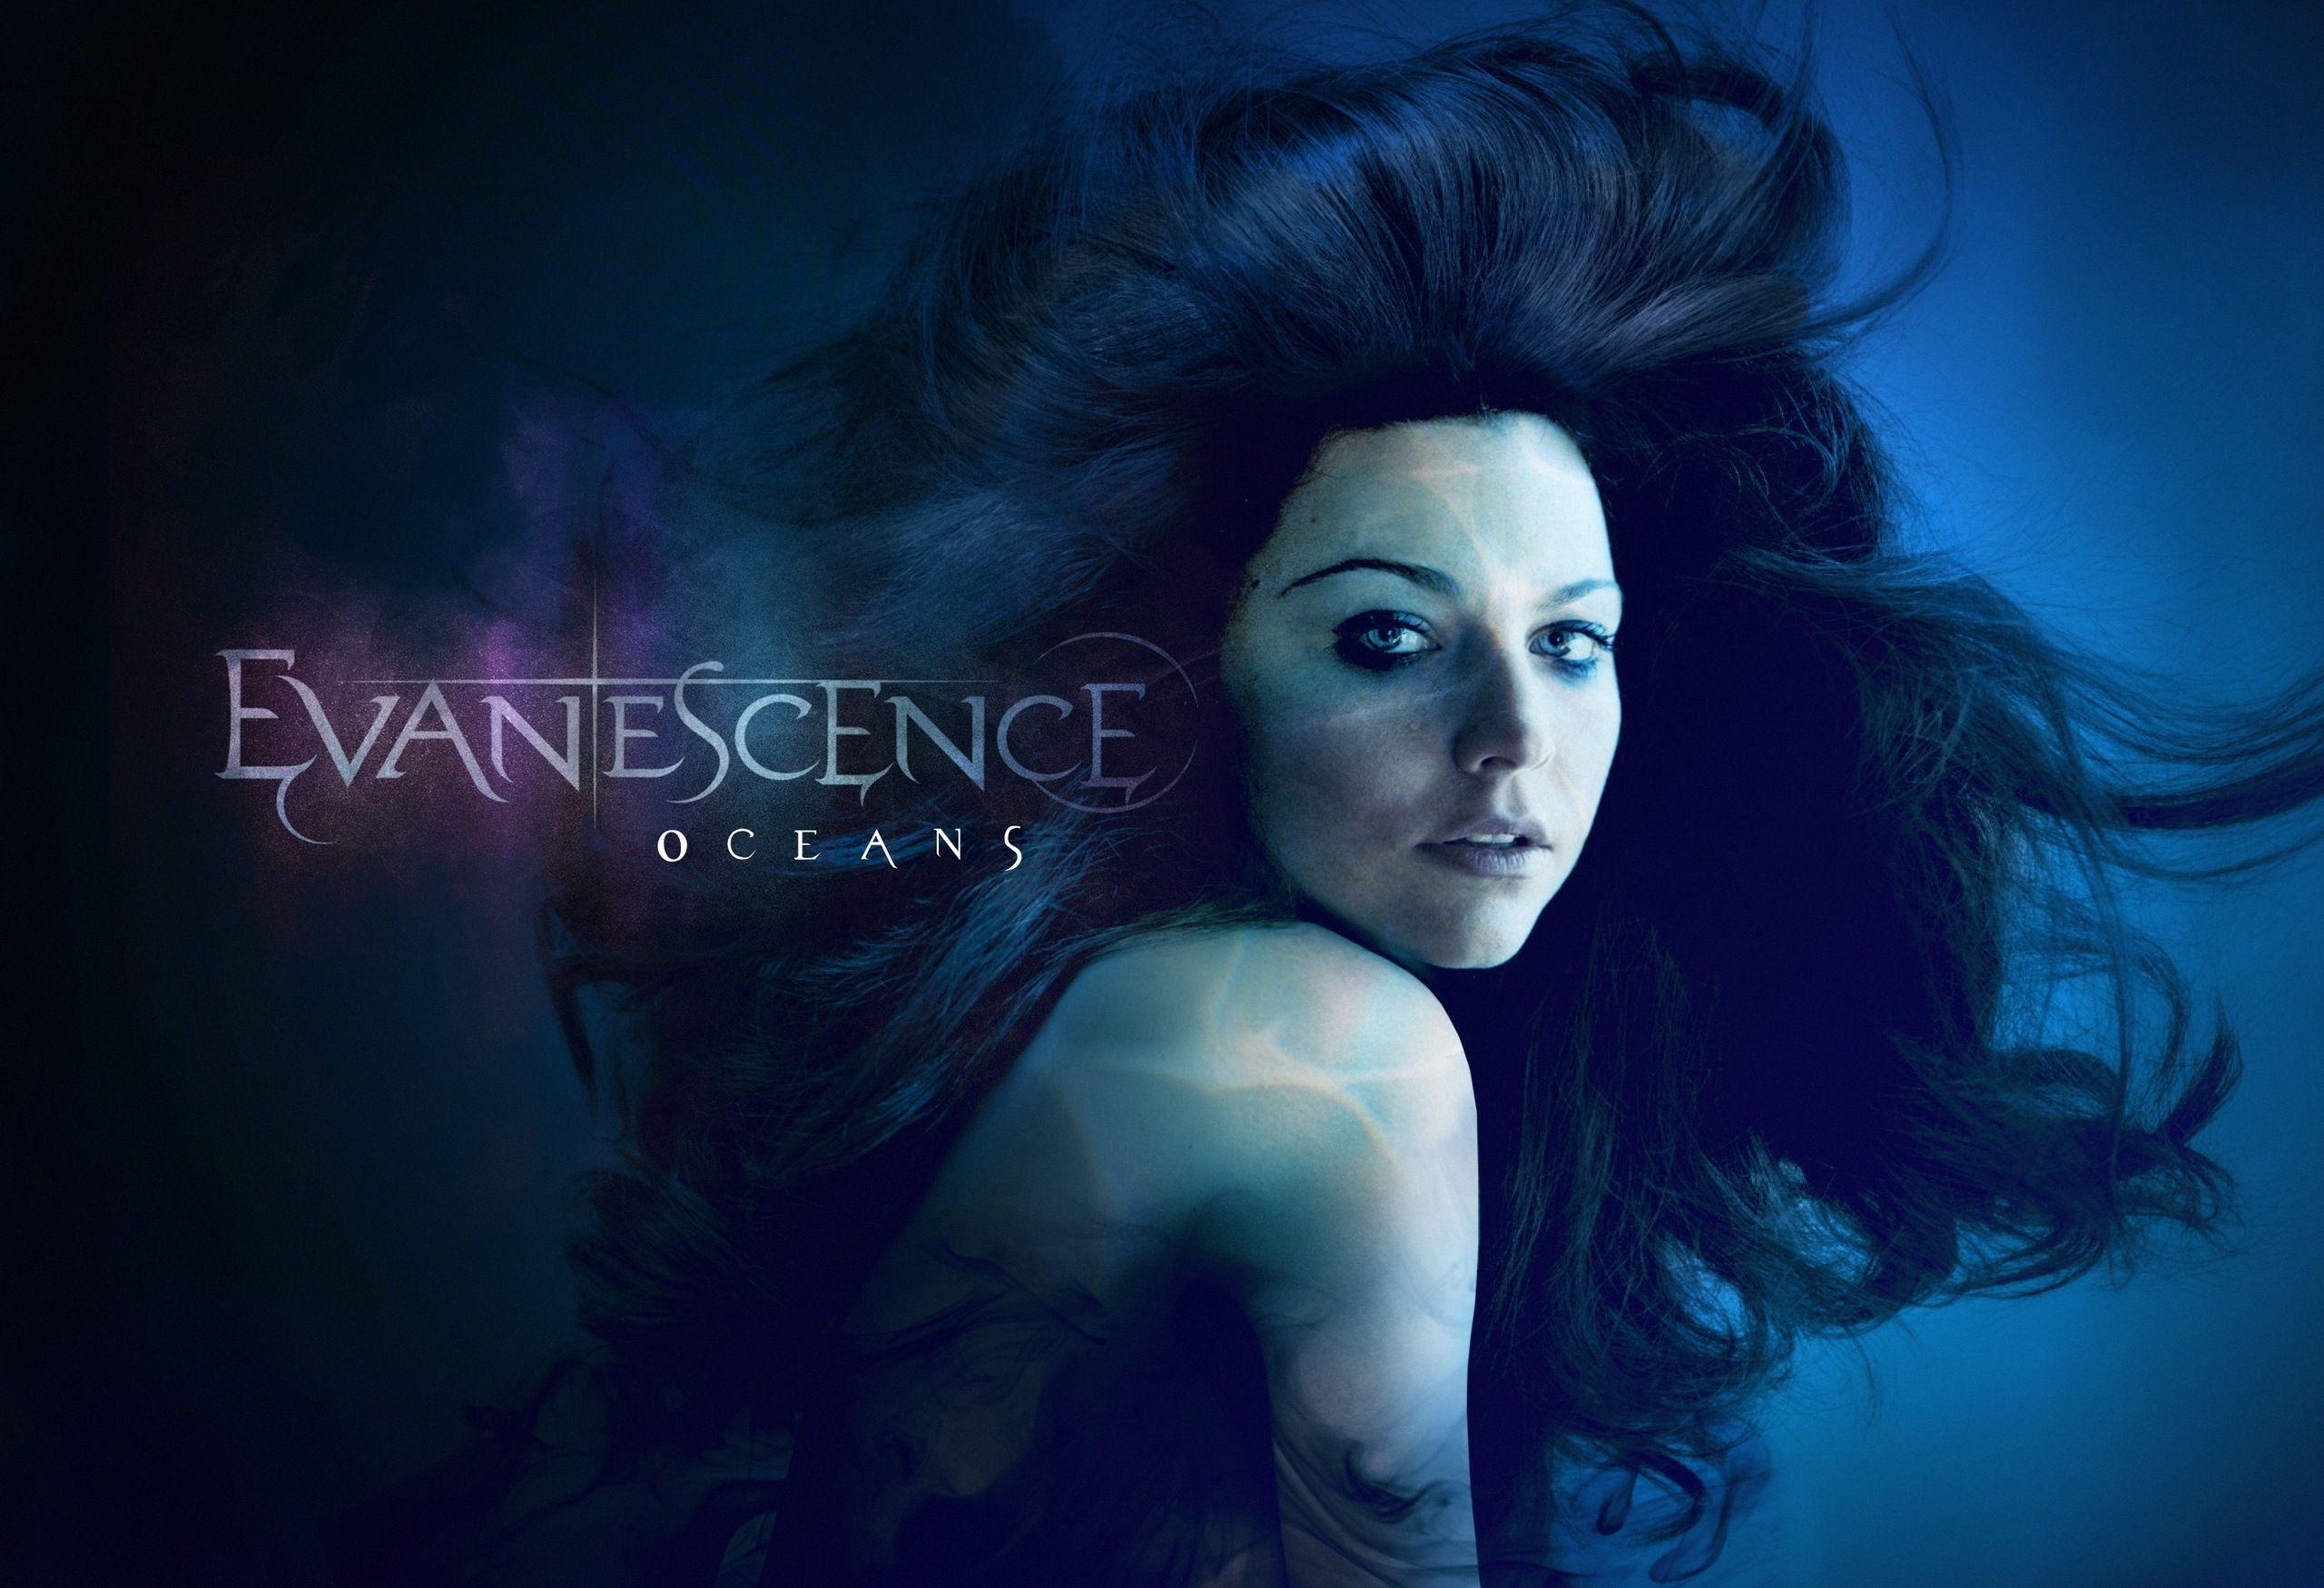 Evanescence Wallpapers 2015 - Wallpaper Cave